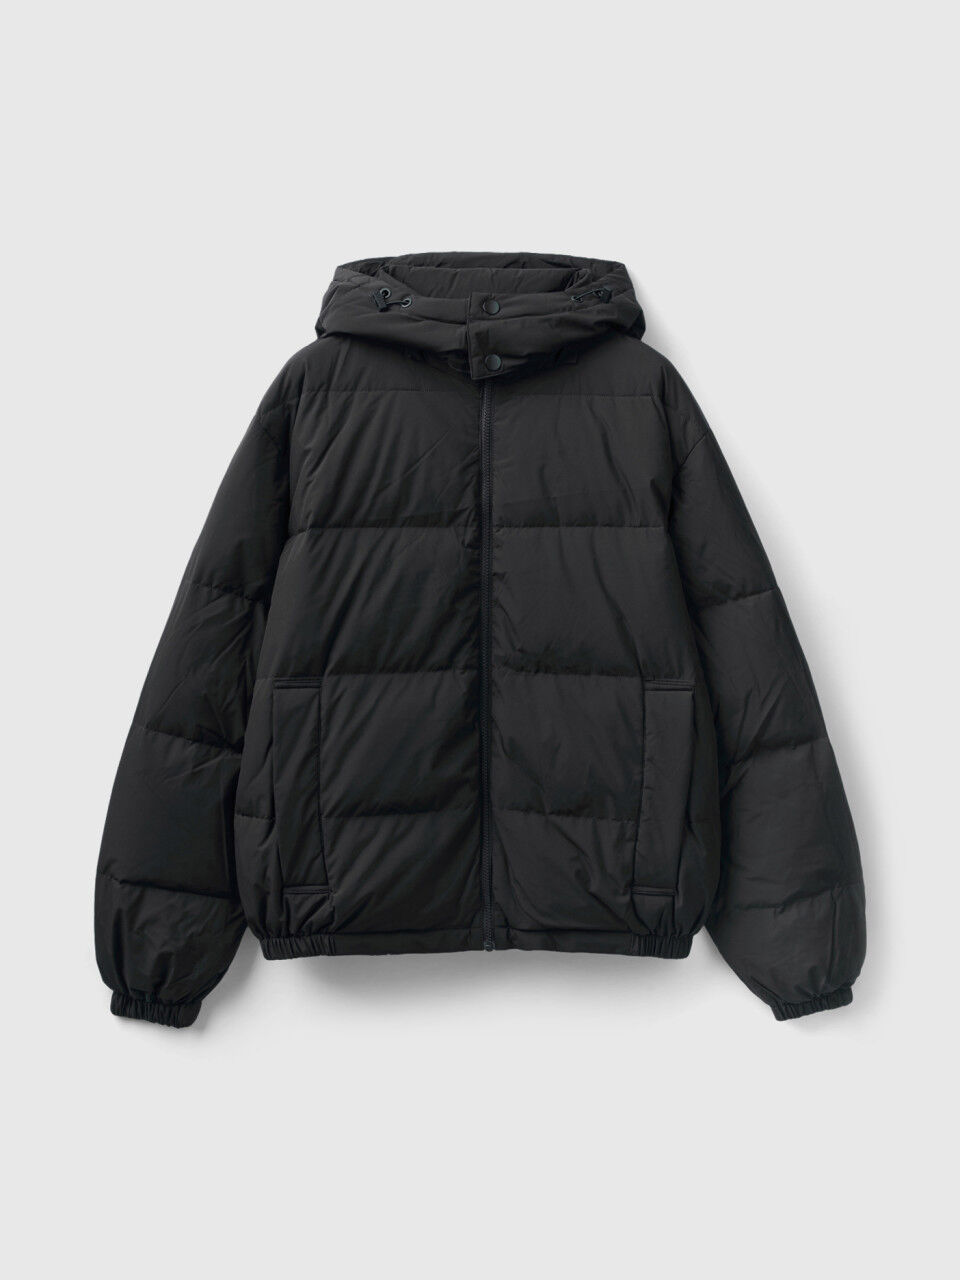 & OTHER STORIES Diamond Padded Puffer Coat in Black | Endource